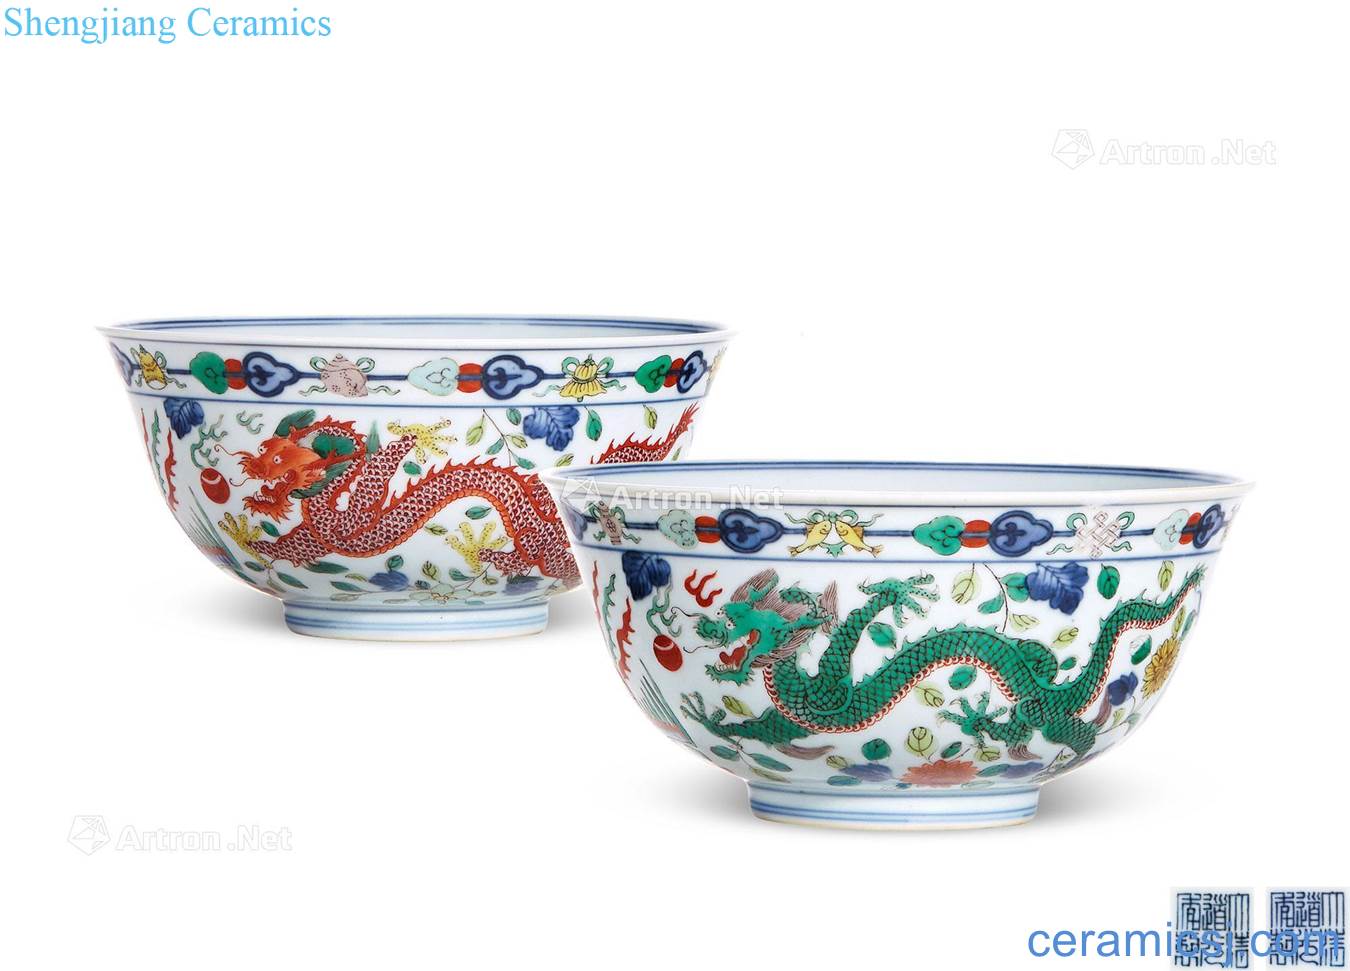 Qing daoguang Colorful longfeng green-splashed bowls (a)